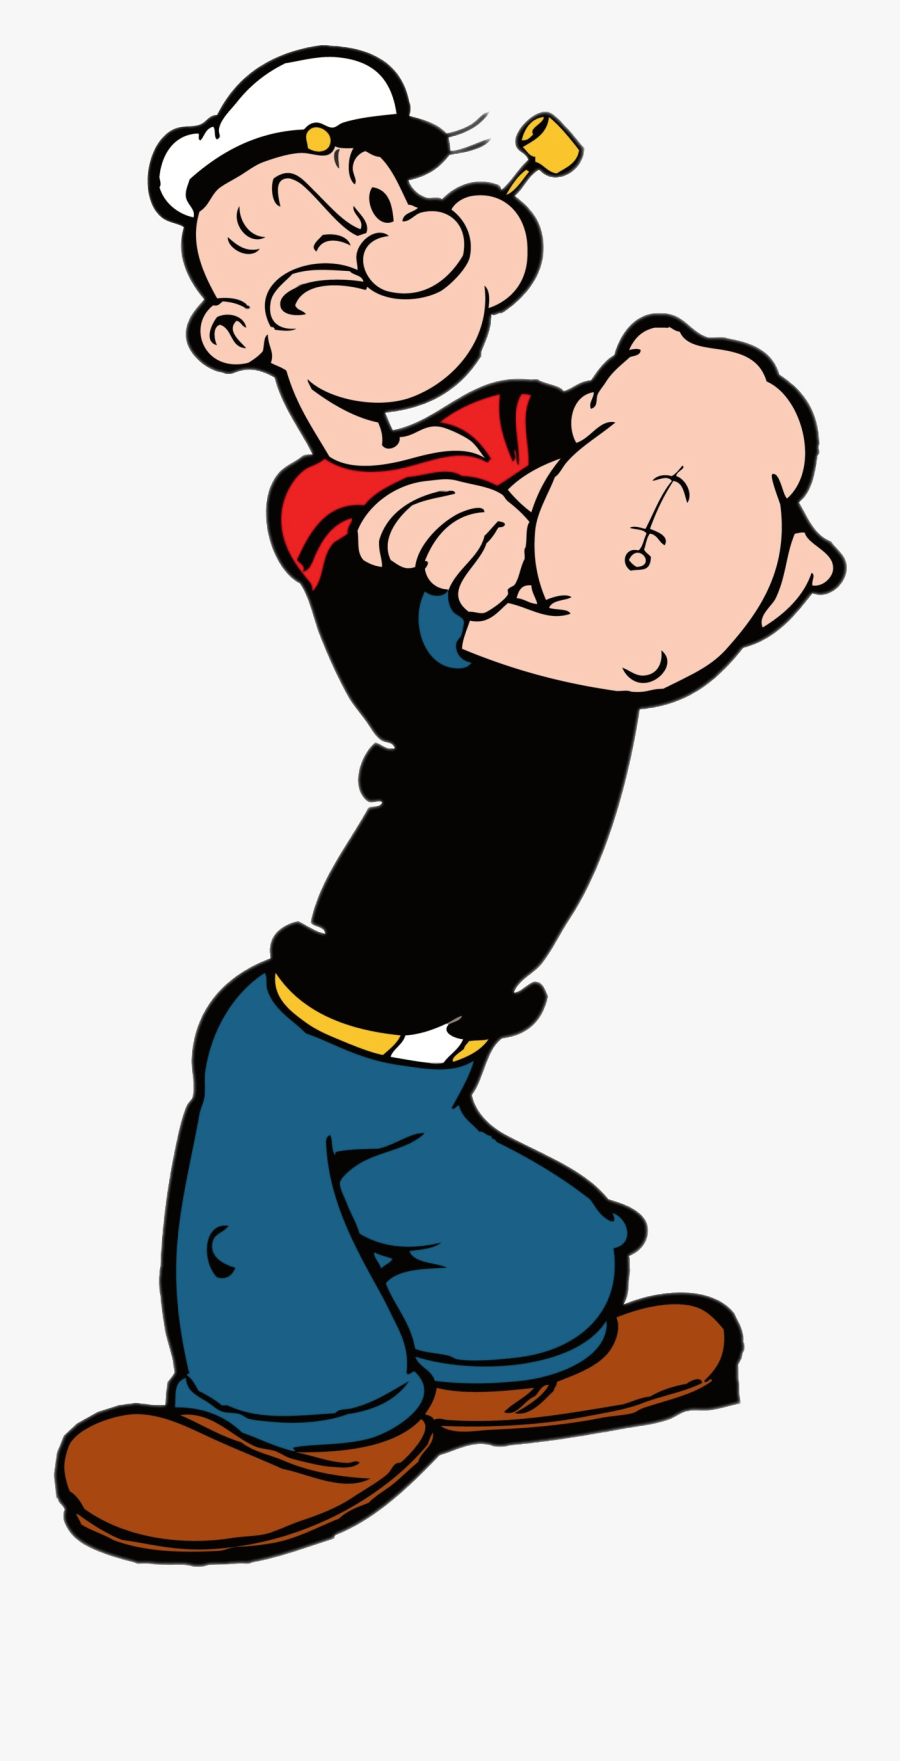 Popeye Arms Crossed - Popeye The Sailor Man, Transparent Clipart